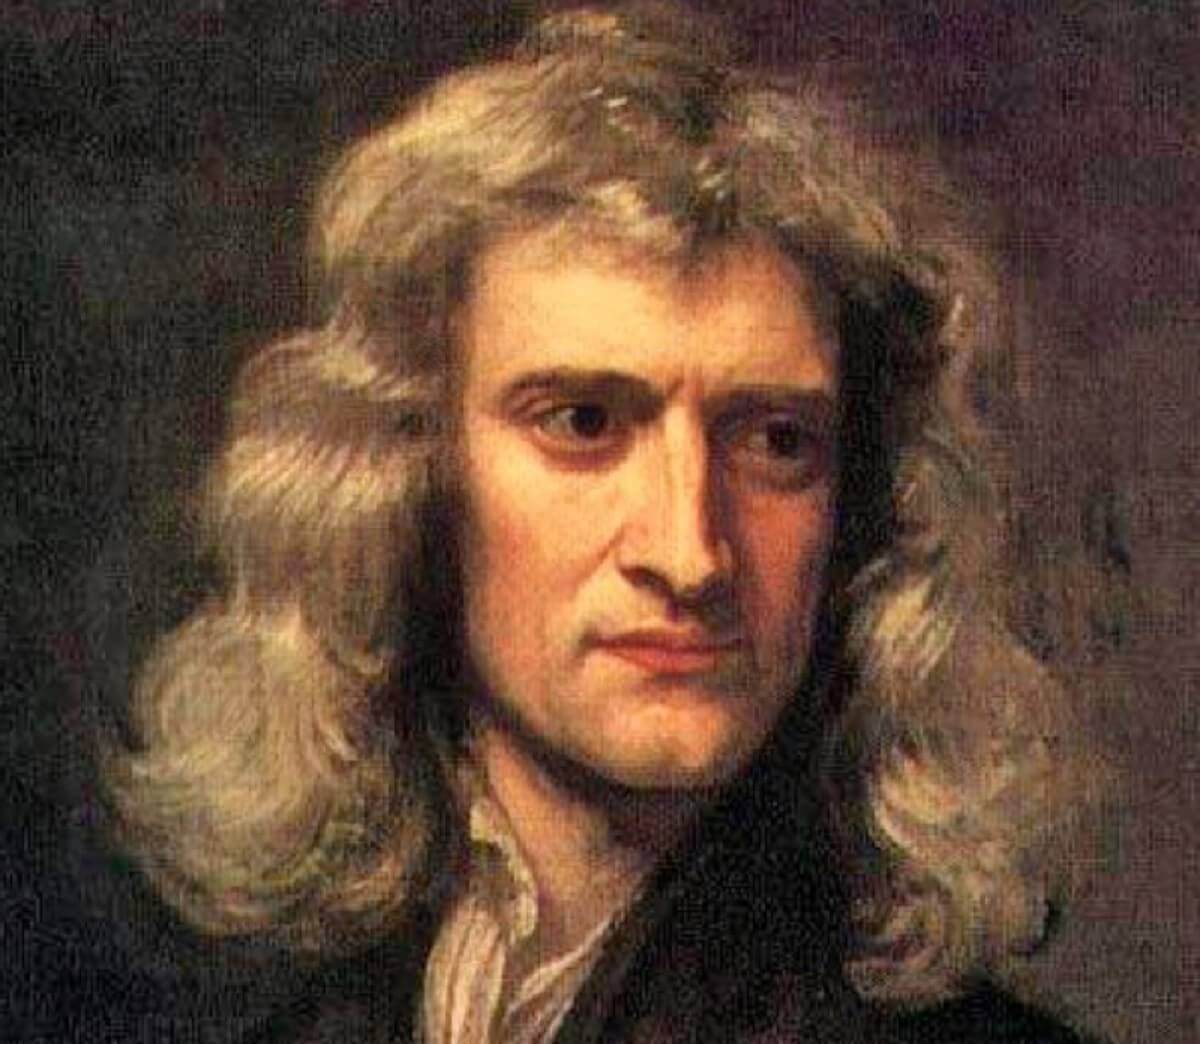 isaac newton 1689 painting sir godfrey kneller public domain via wikimedia commons cropped